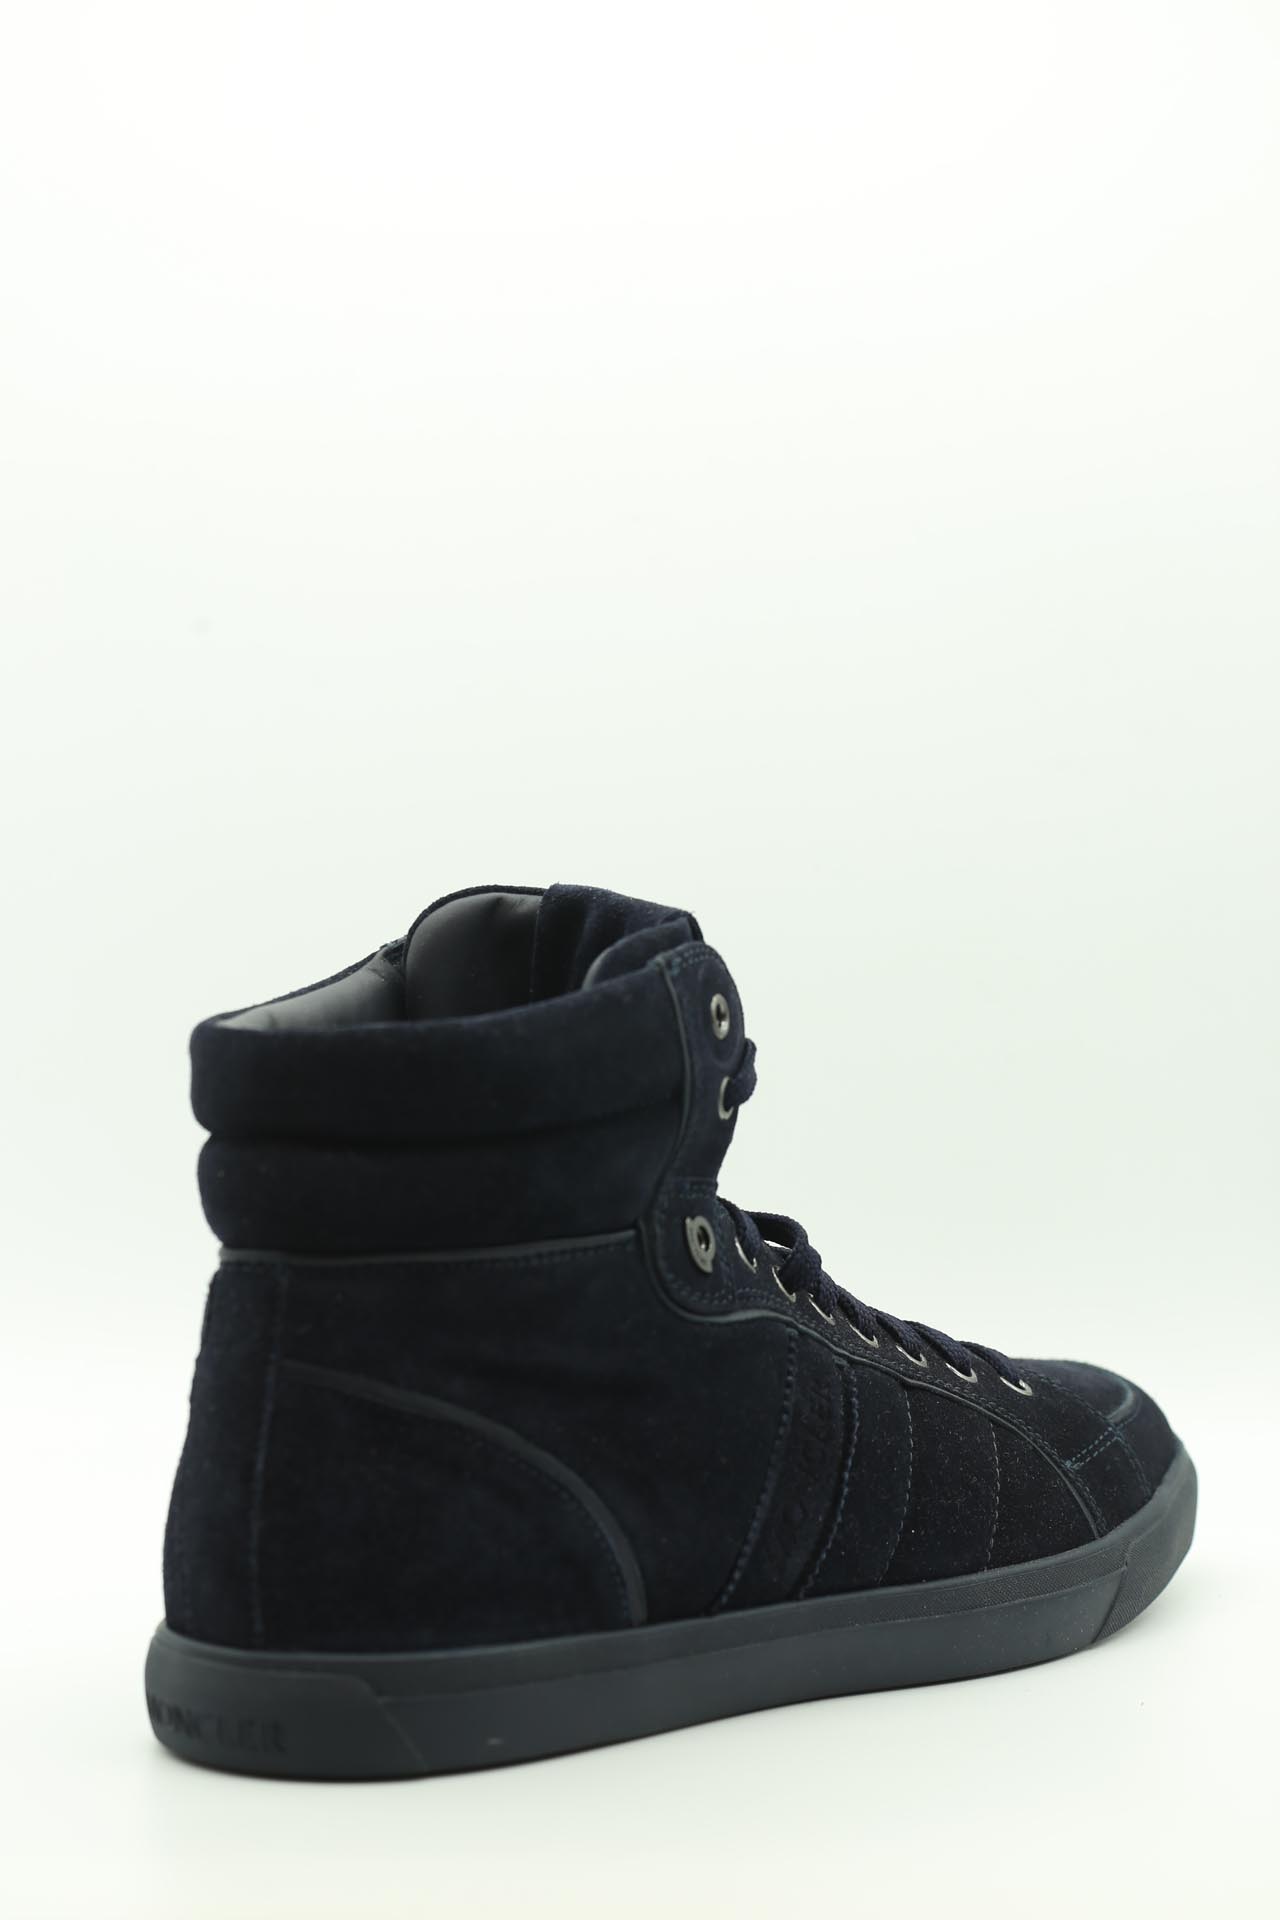 Moncler, Sneakers